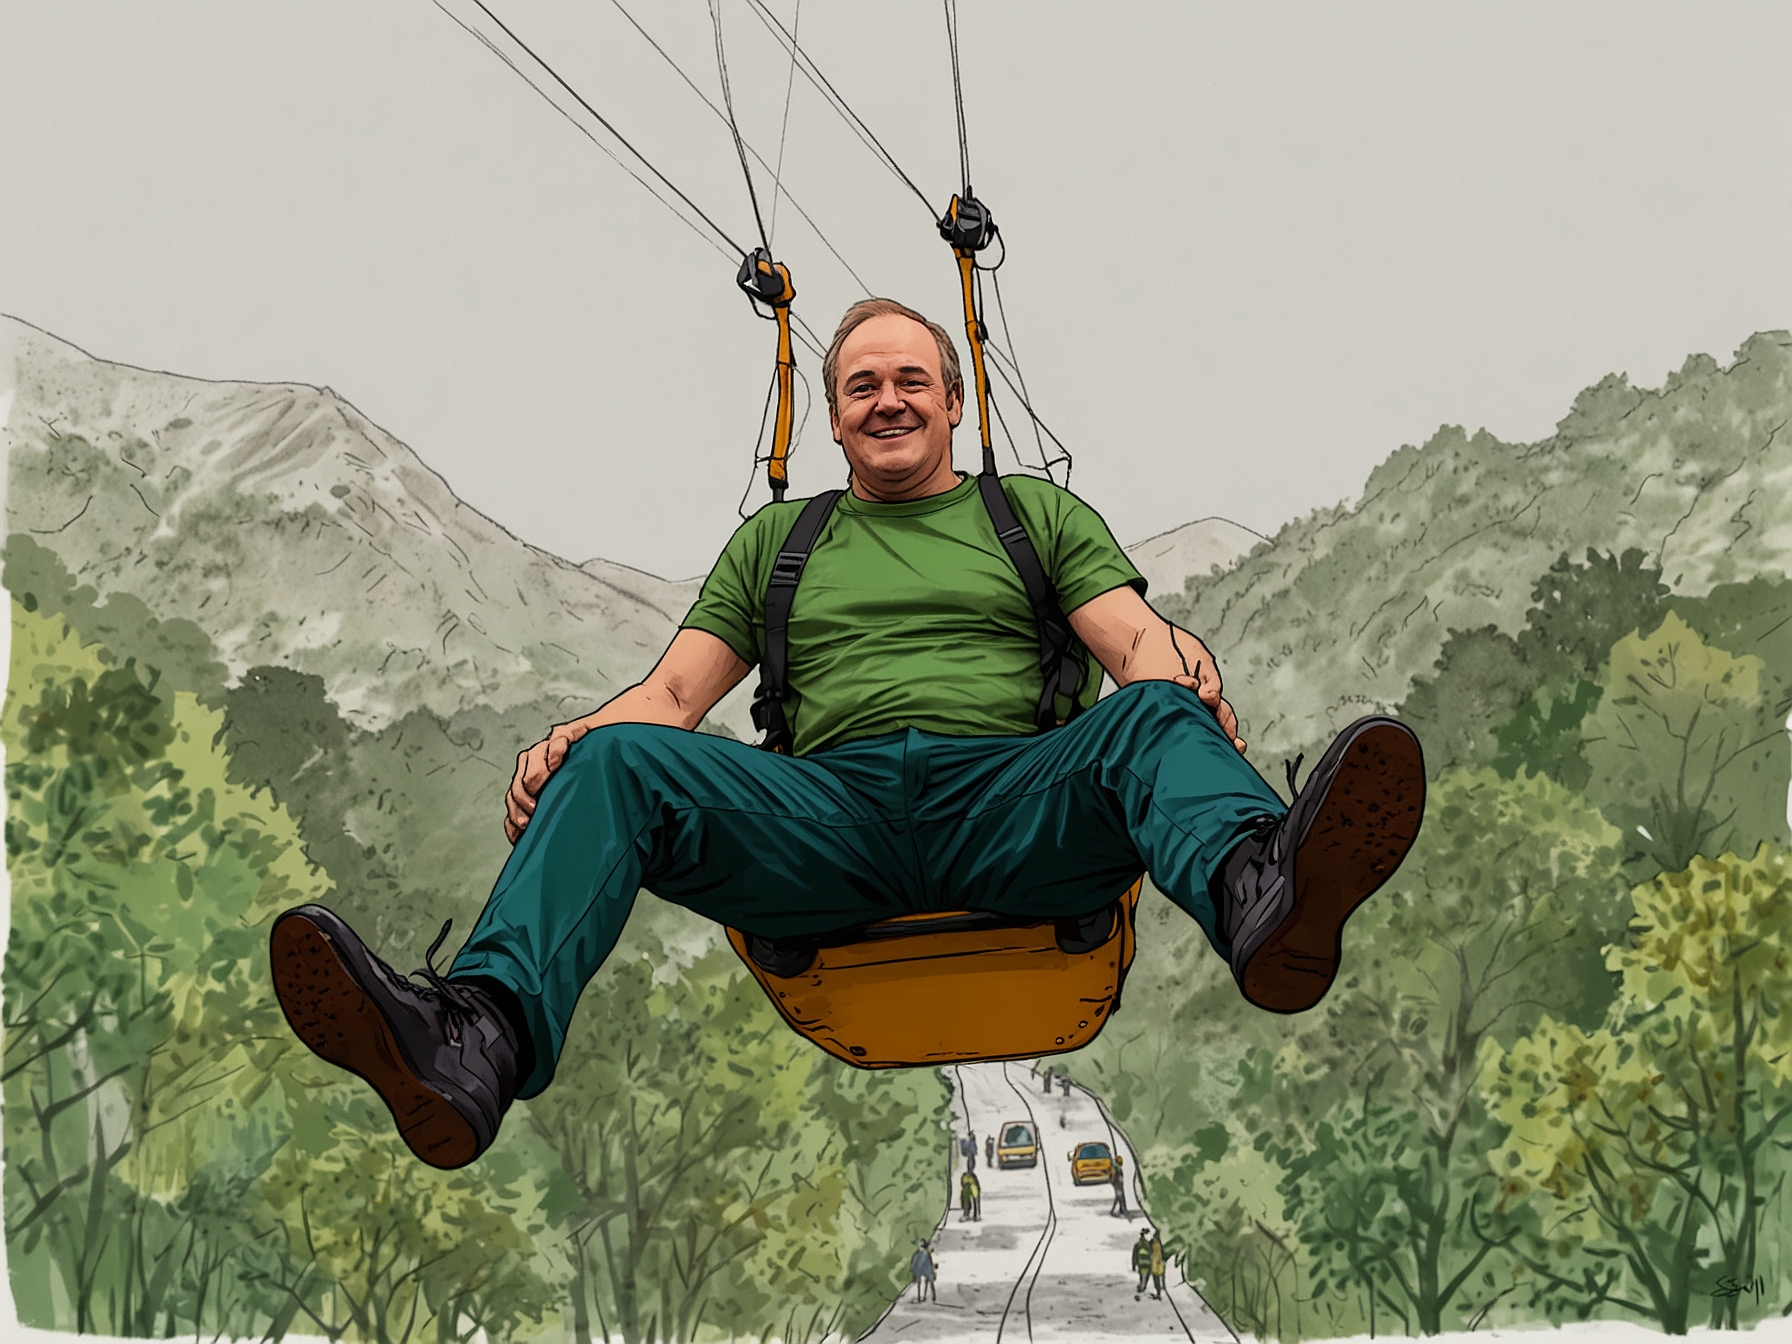 Sir Ed Davey zip-lining into a green energy rally, symbolizing the Liberal Democrats' commitment to achieving net-zero carbon emissions by 2045.